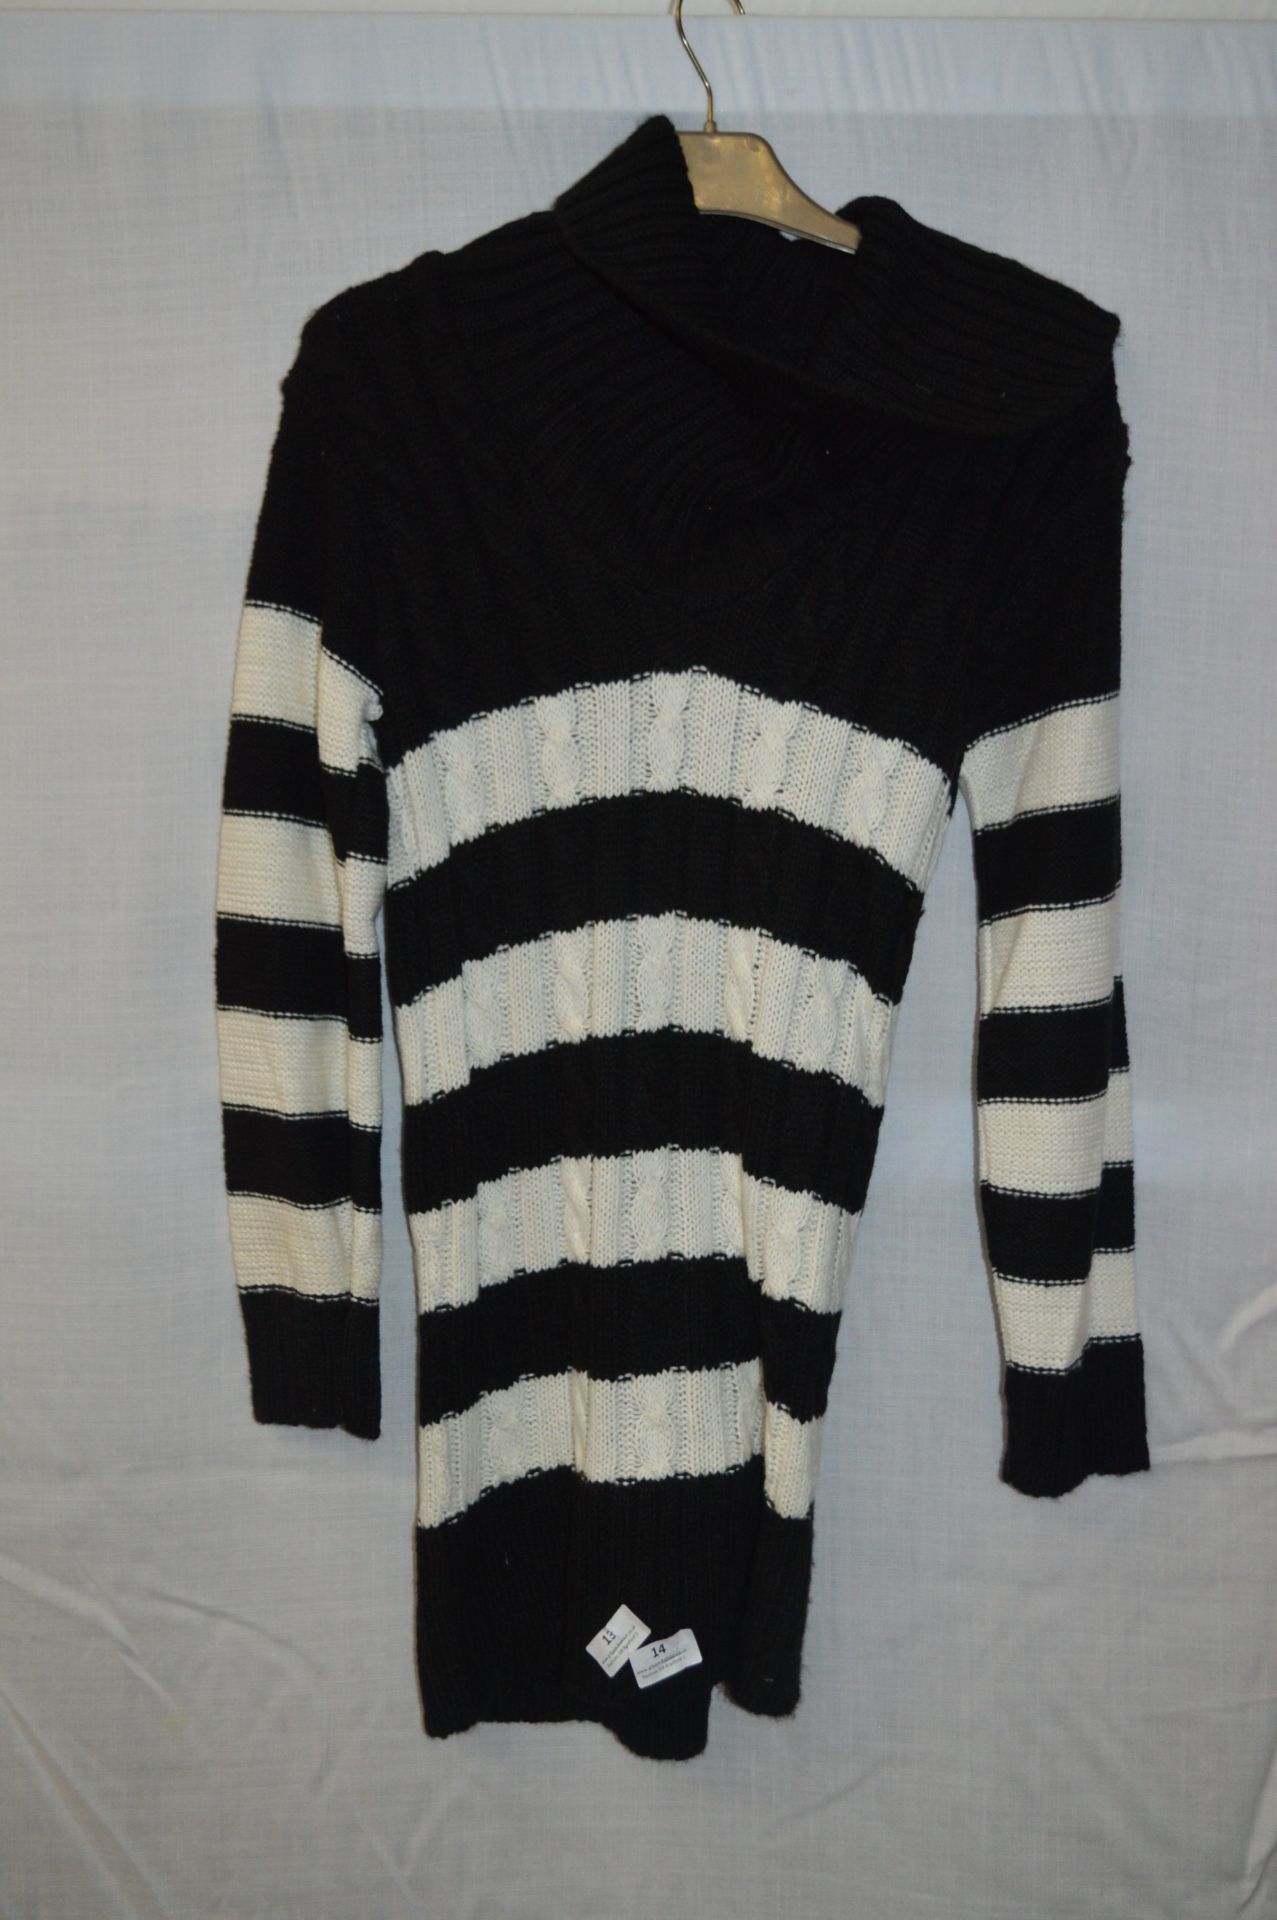 Box of Five Knitted Black & White Stripped Jumper